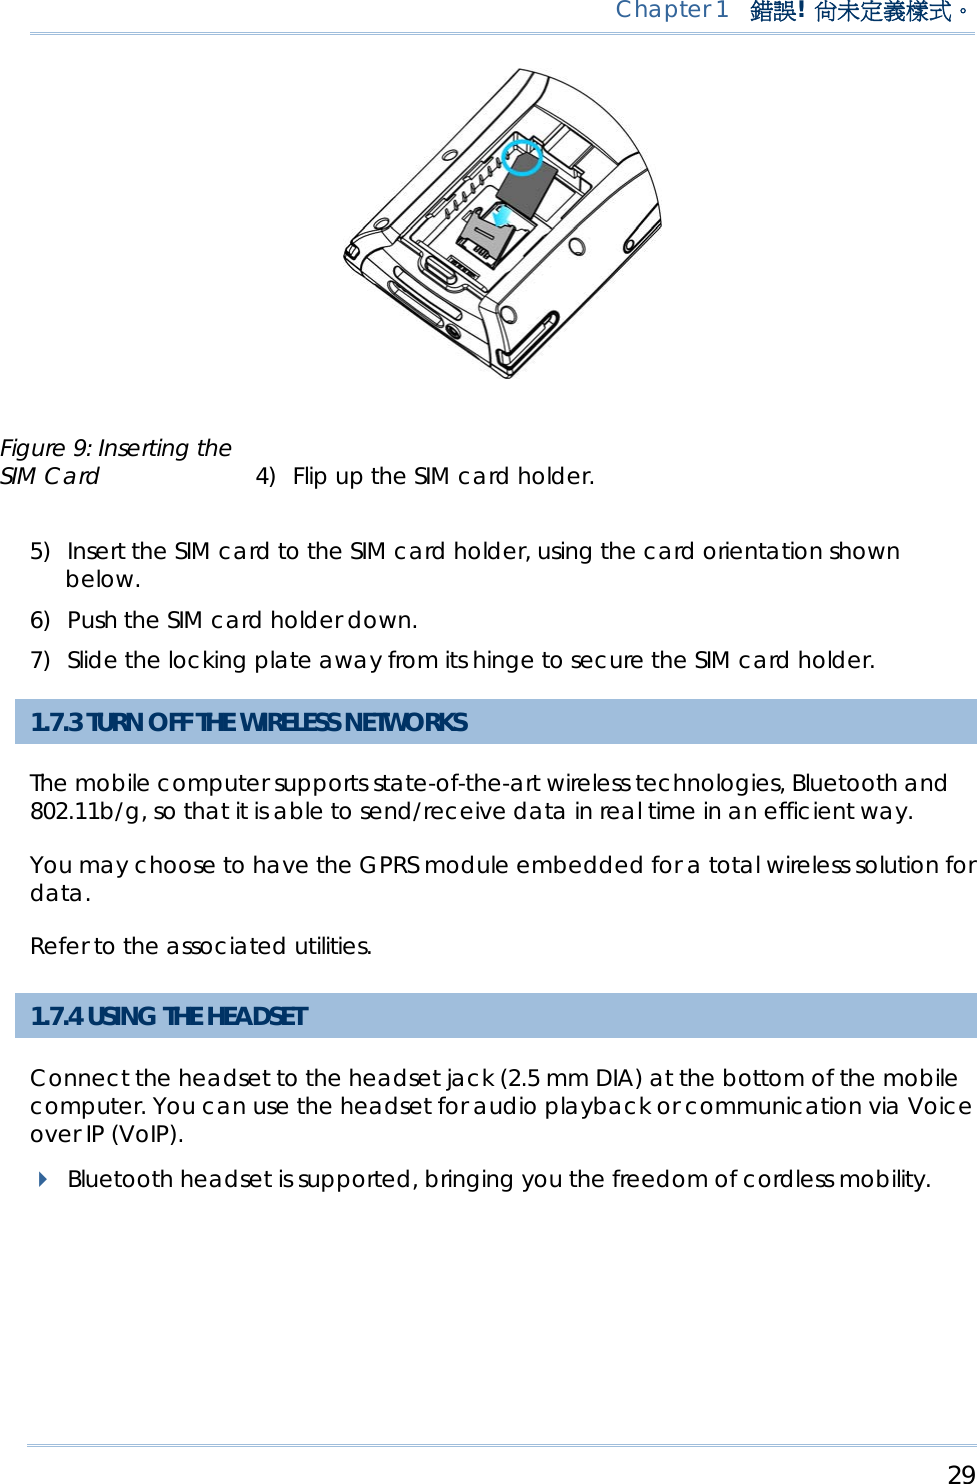     29   Chapter 1  錯誤!  尚未定義樣式。     4) Flip up the SIM card holder. 5) Insert the SIM card to the SIM card holder, using the card orientation shown below. 6) Push the SIM card holder down. 7) Slide the locking plate away from its hinge to secure the SIM card holder. 1.7.3 TURN OFF THE WIRELESS NETWORKS The mobile computer supports state-of-the-art wireless technologies, Bluetooth and 802.11b/g, so that it is able to send/receive data in real time in an efficient way.  You may choose to have the GPRS module embedded for a total wireless solution for data.  Refer to the associated utilities.  1.7.4 USING THE HEADSET Connect the headset to the headset jack (2.5 mm DIA) at the bottom of the mobile computer. You can use the headset for audio playback or communication via Voice over IP (VoIP).    Bluetooth headset is supported, bringing you the freedom of cordless mobility. Figure 9: Inserting the SIM Card 